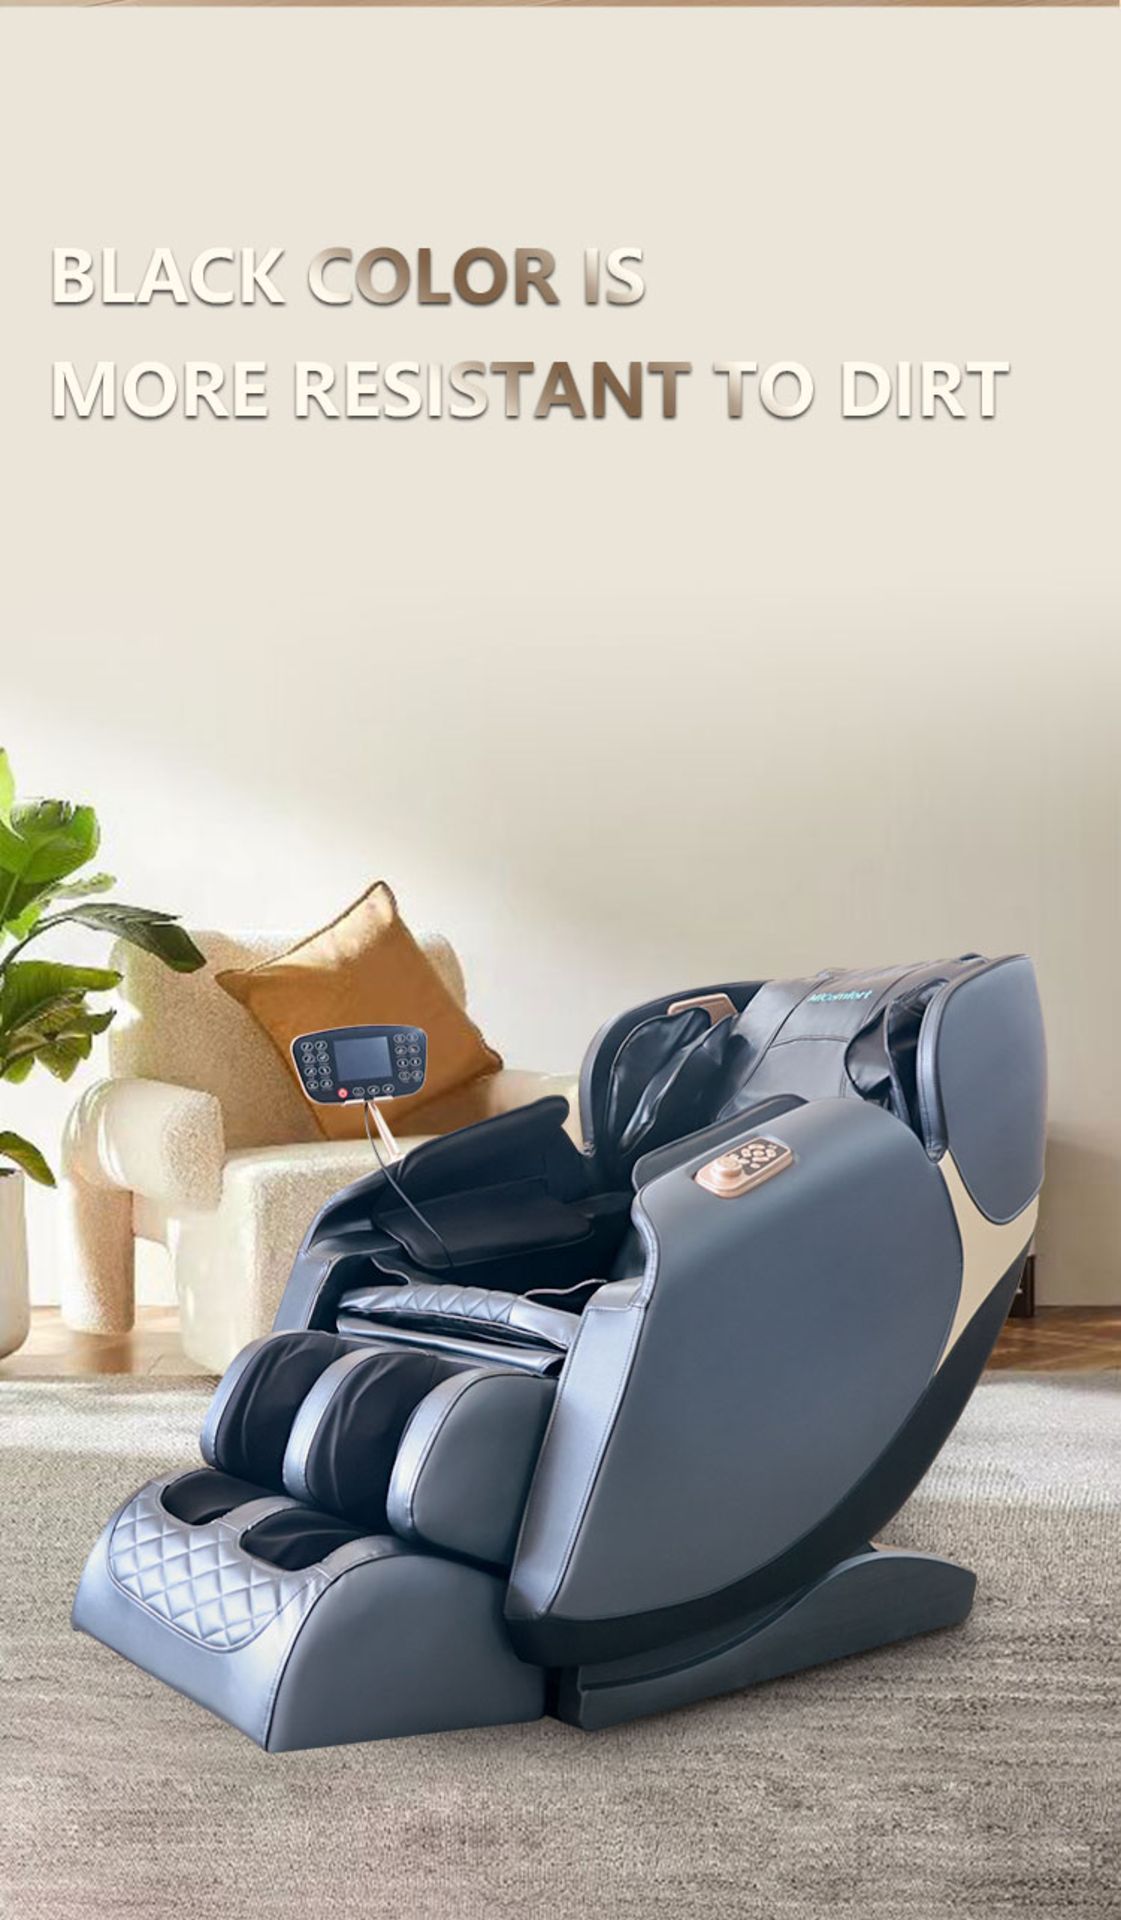 Brand New in Box Orchid Blue/Black MiComfort Full Body Massage Chair RRP £2199 *NO VAT* - Image 6 of 14